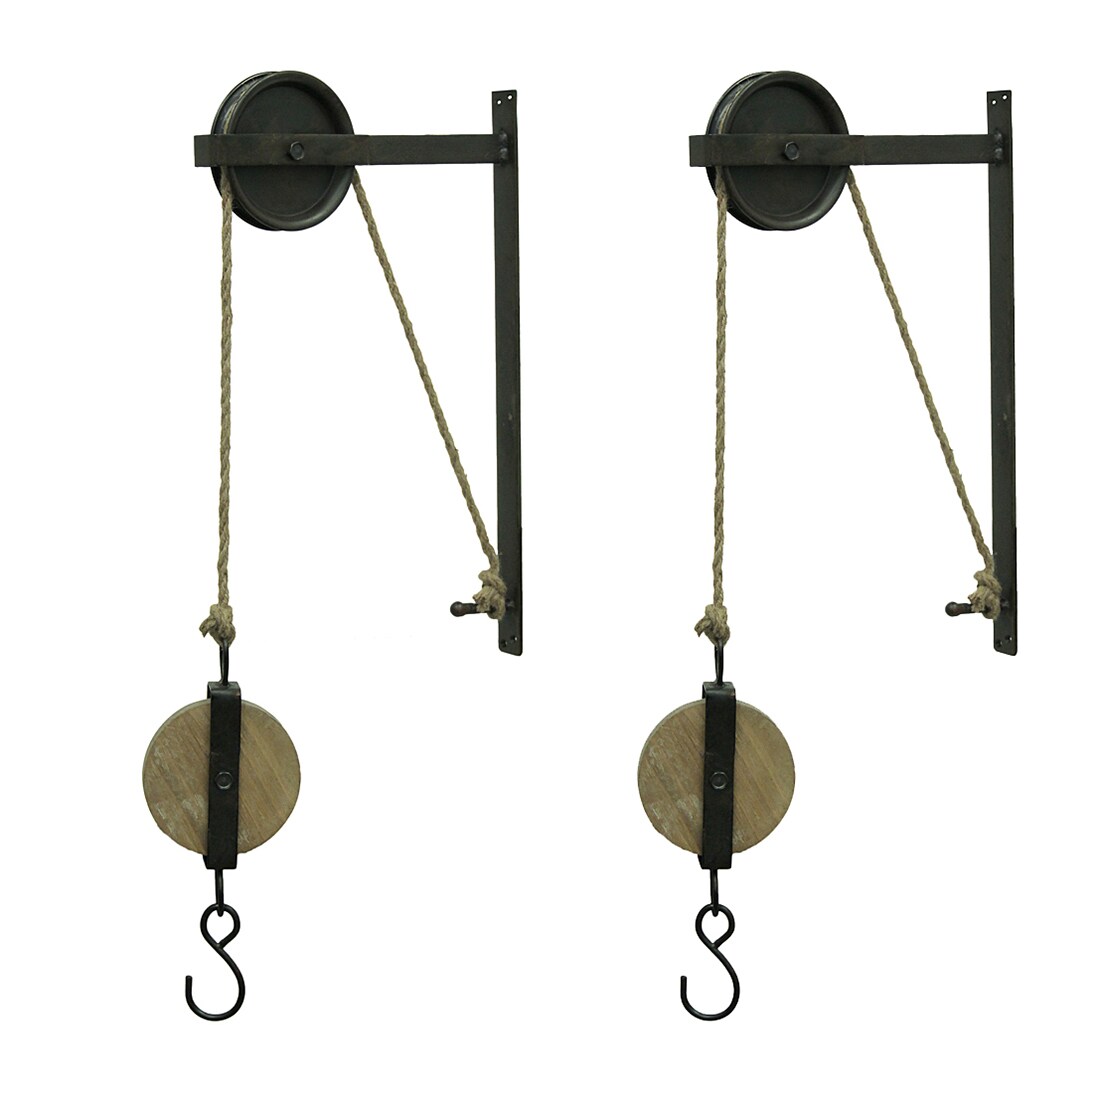 Rustic Vintage Style Metal and Wood Pulley and Hook Wall Hanging